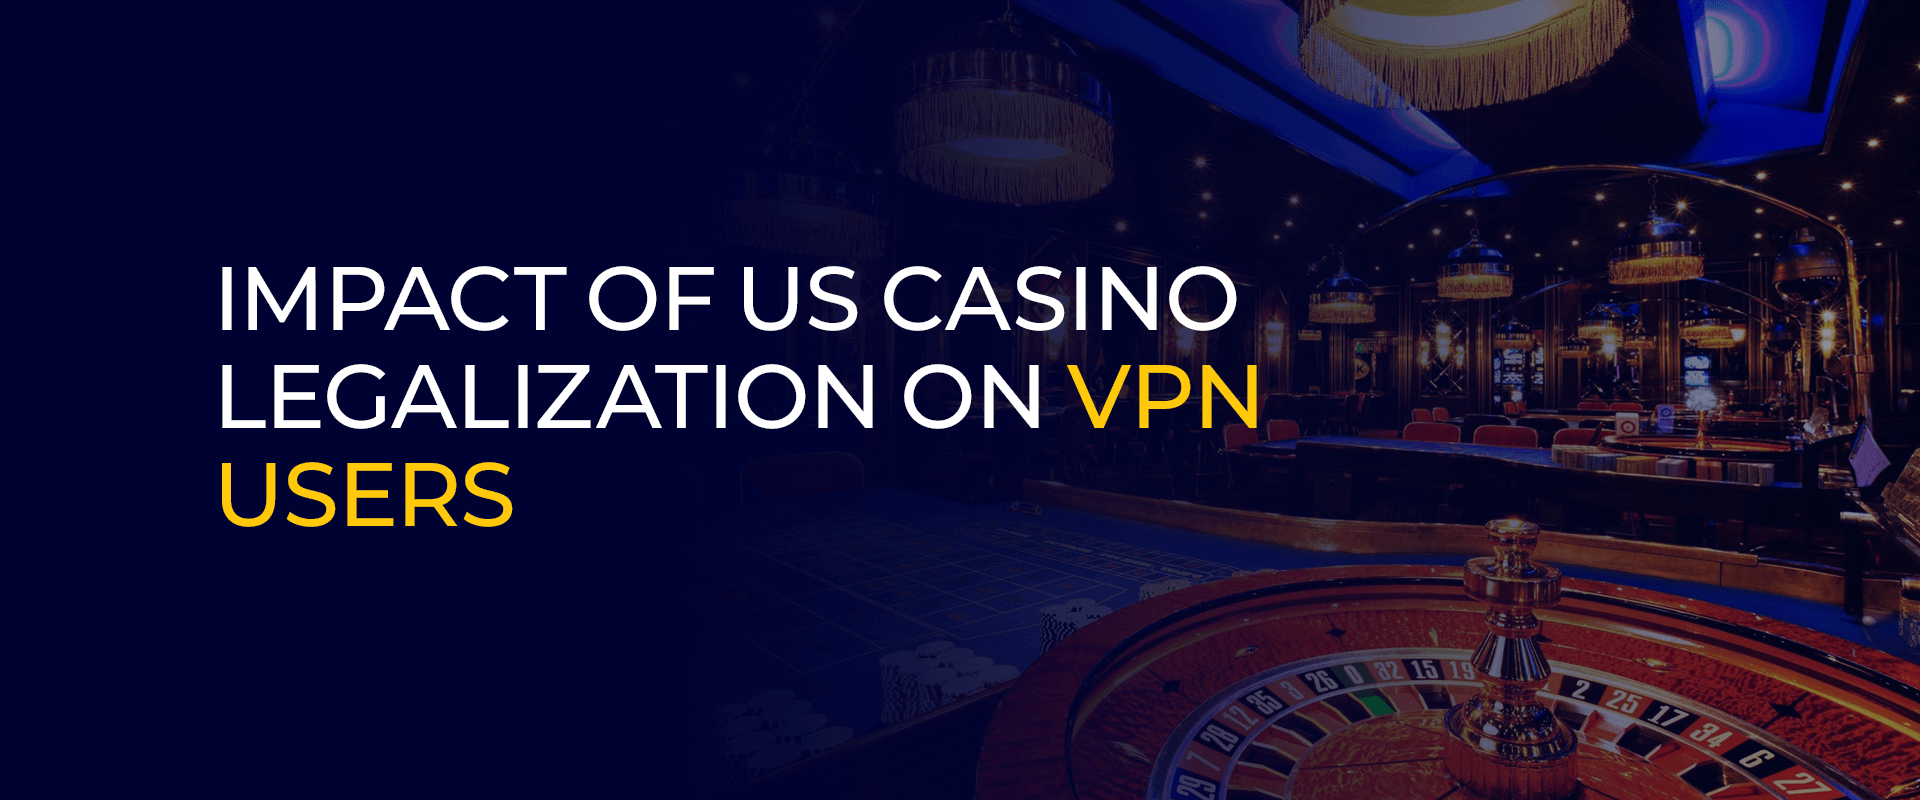 Impact of US Casino Legalization On VPN Users